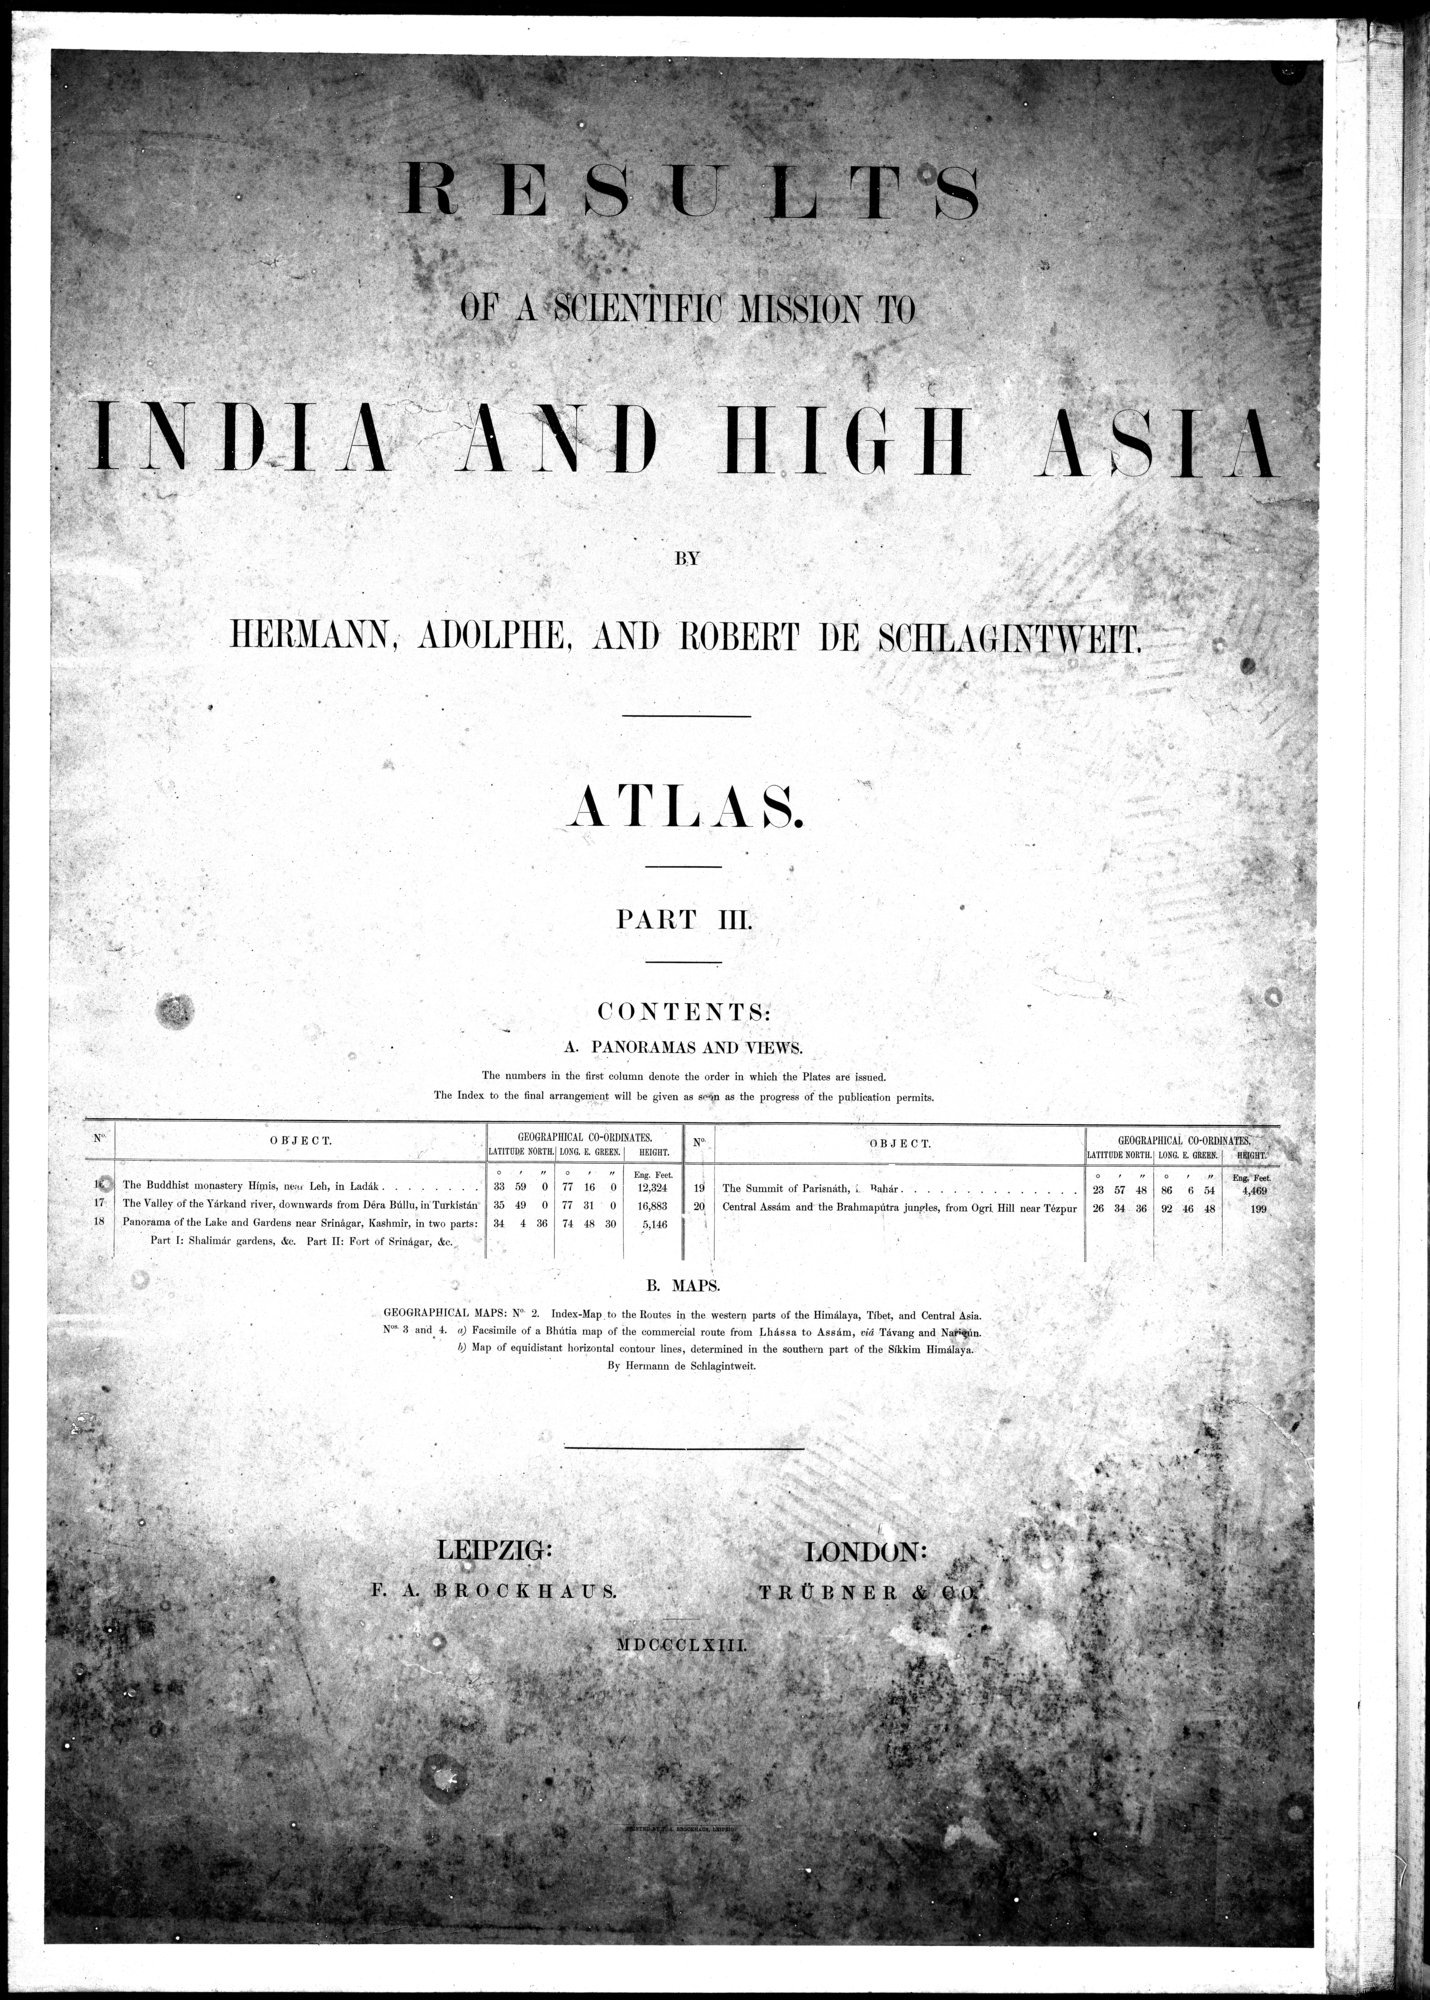 Results of a Scientific Mission to India and High Asia : vol.6 / Page 2 (Grayscale High Resolution Image)